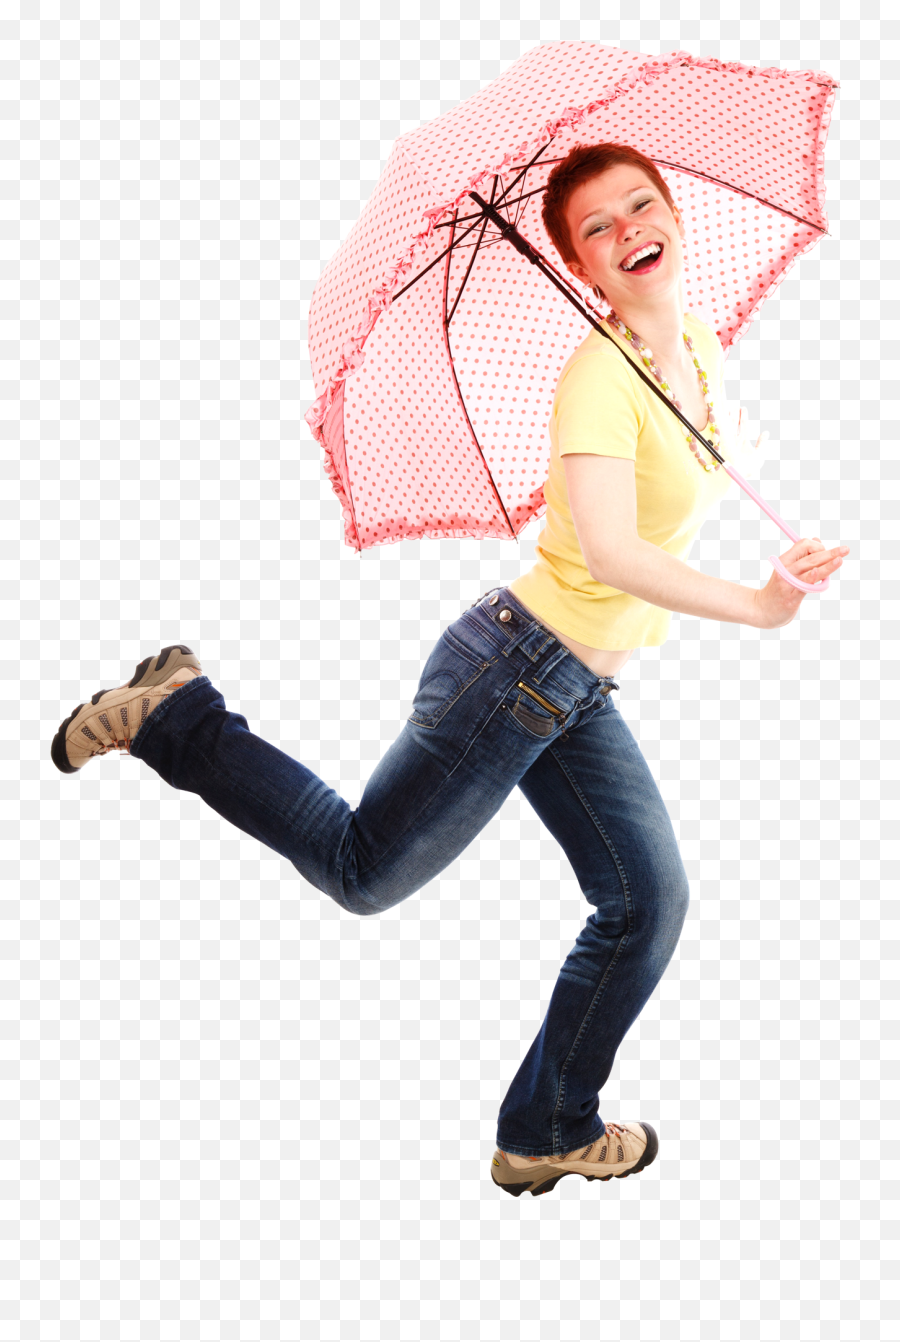 Beautiful Young Woman With Umbrella Png Image - Pngpix Women With Umbrella Png,Umbrella Png